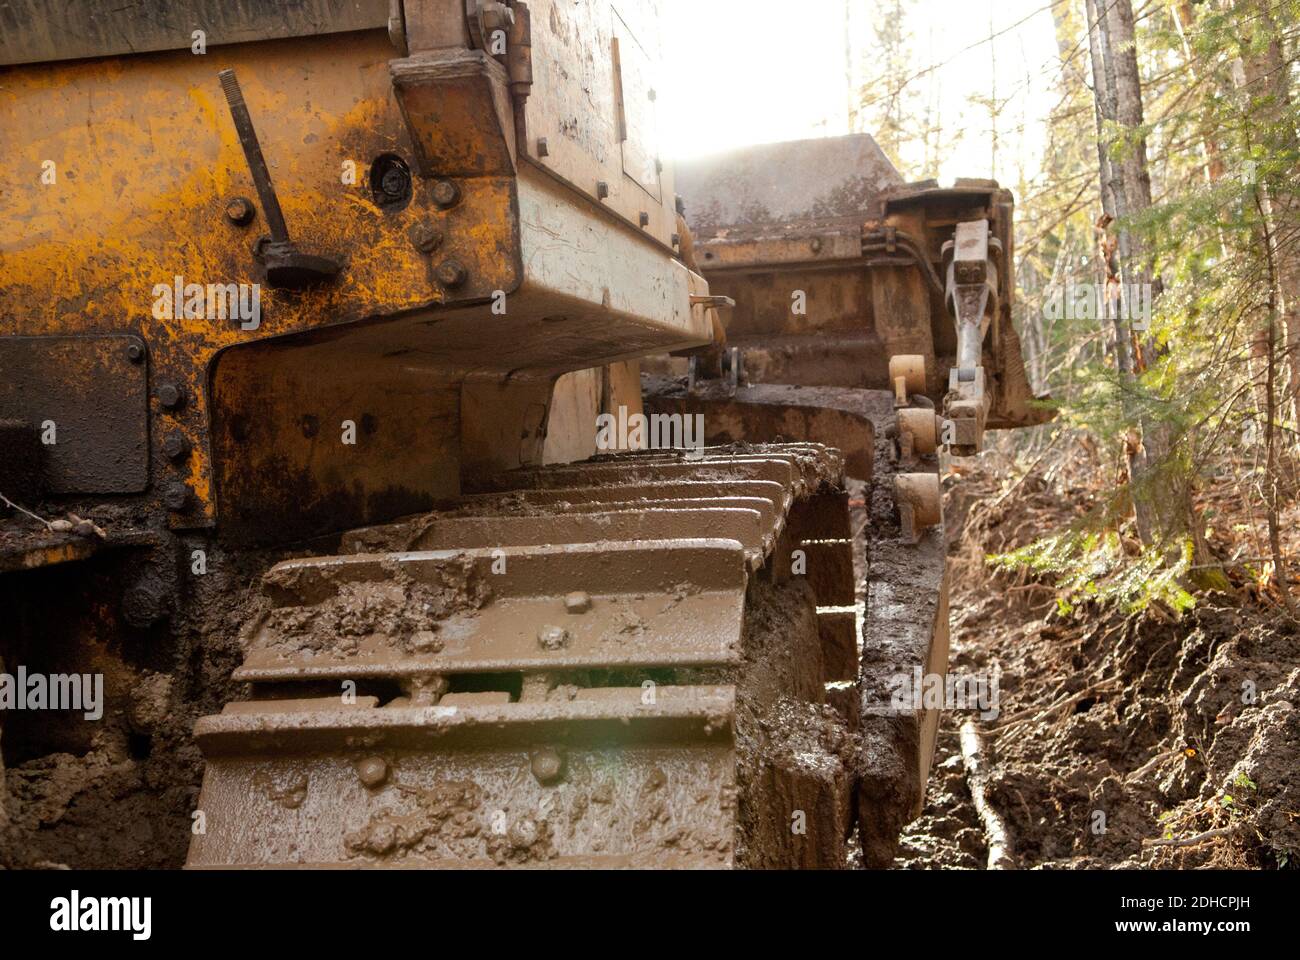 large bulldozer pulling my truck out of the mud Stock Photo